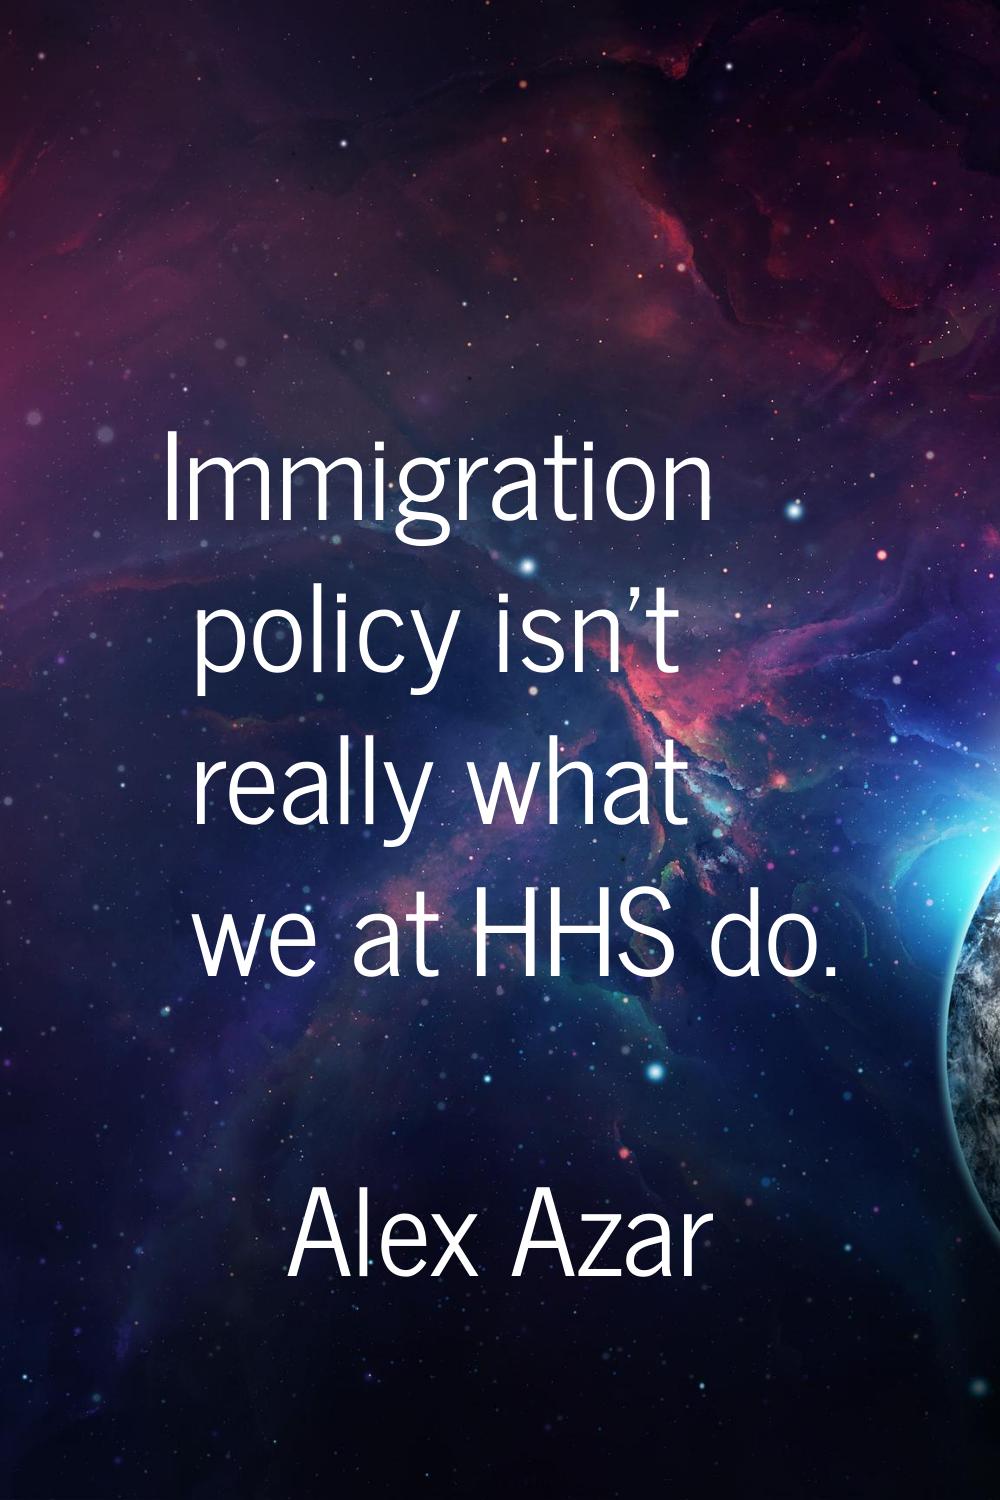 Immigration policy isn't really what we at HHS do.